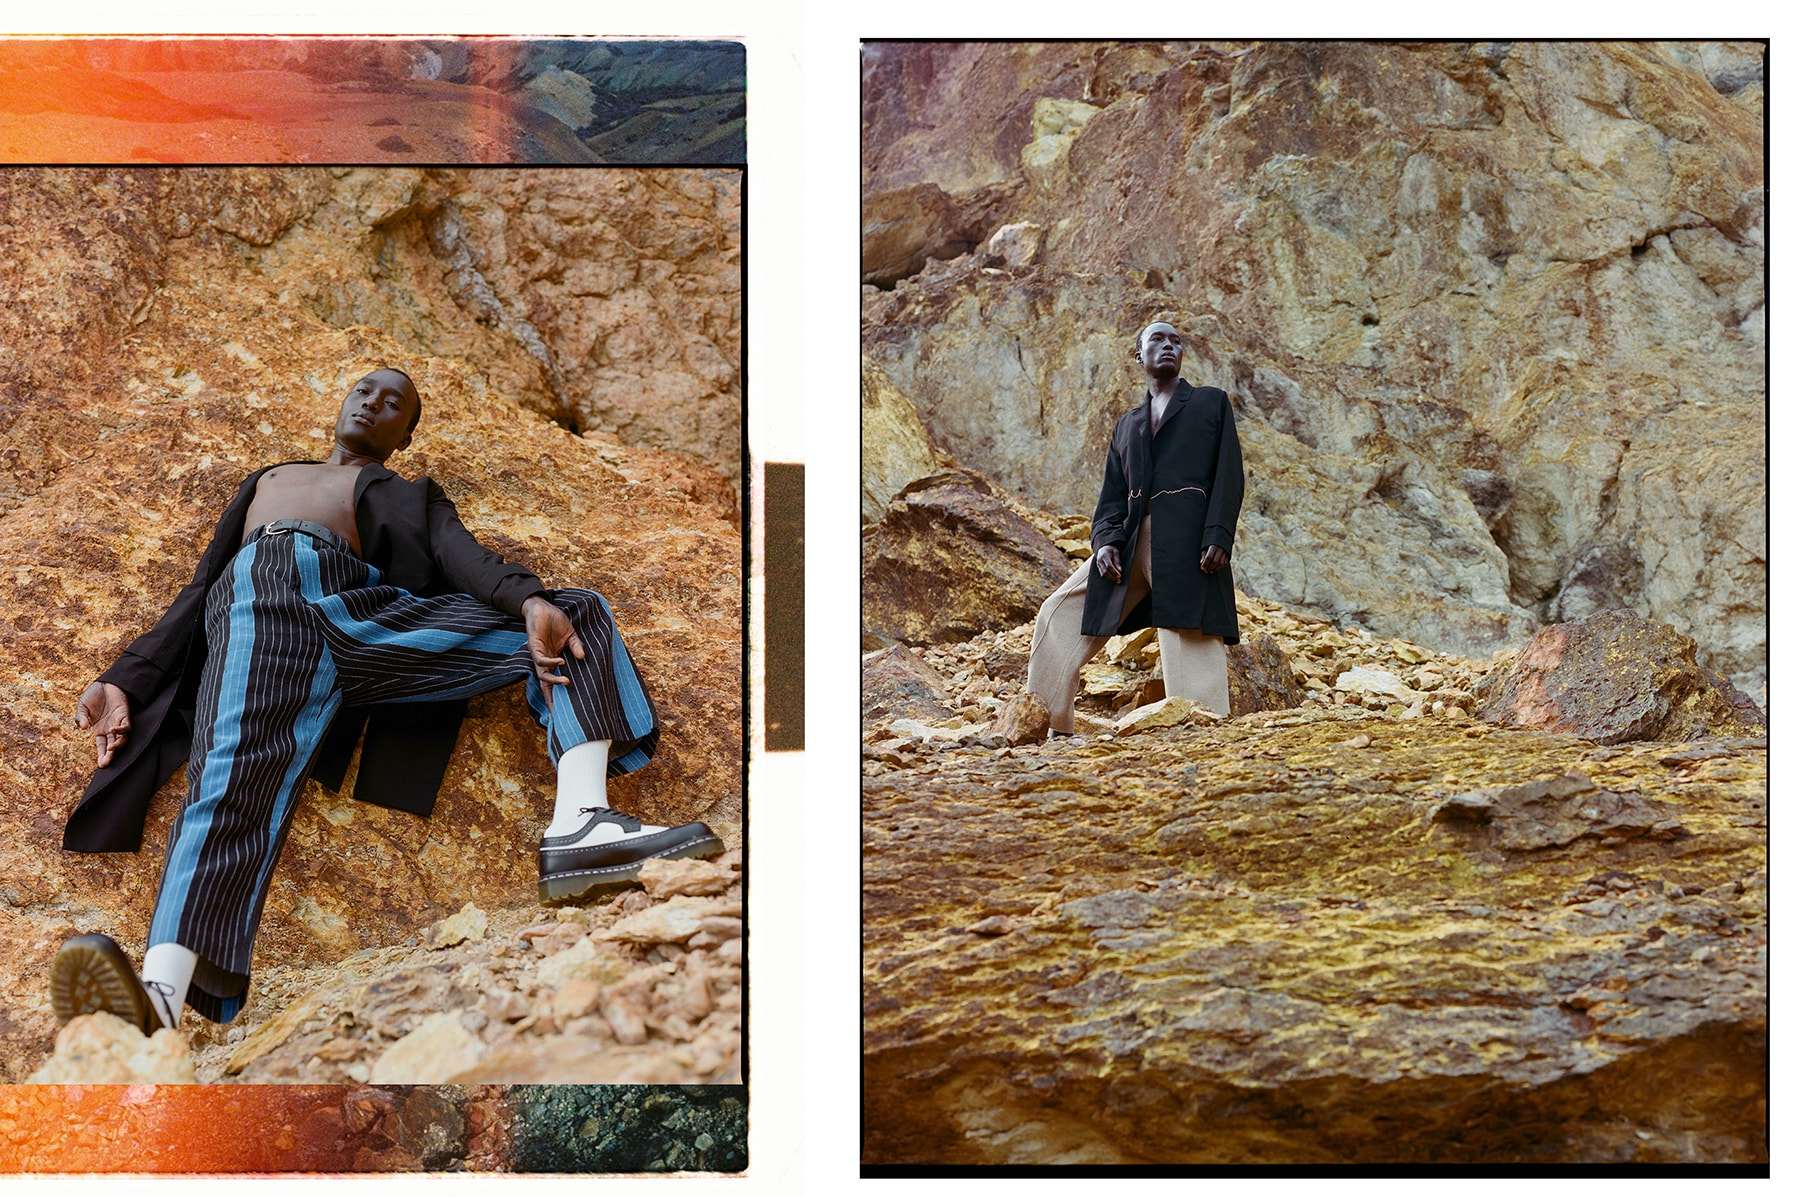 The ATLiens Editorial From Ne.Sense and India Rose